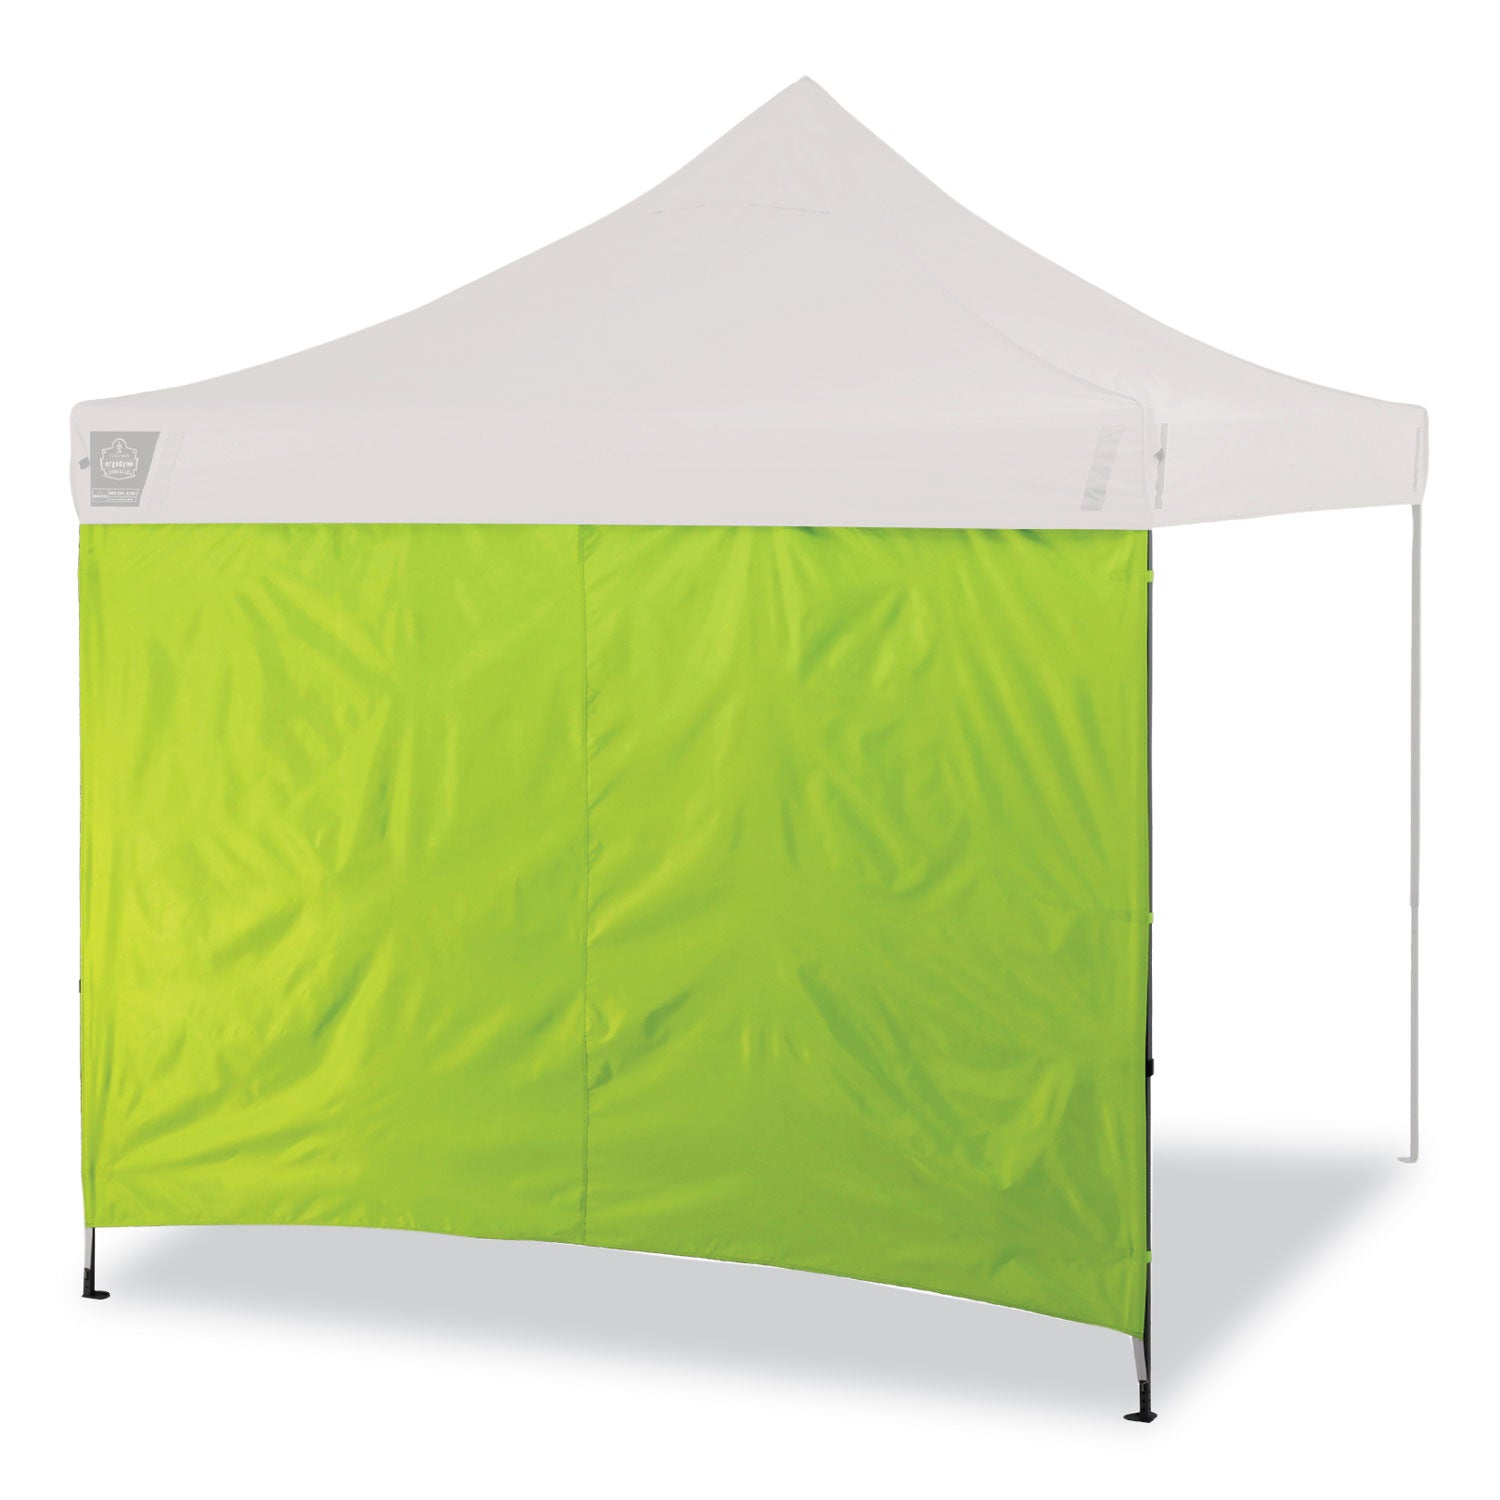 shax-6098-pop-up-tent-sidewall-single-skin-10-ft-x-10-ft-polyester-lime-ships-in-1-3-business-days_ego12998 - 1